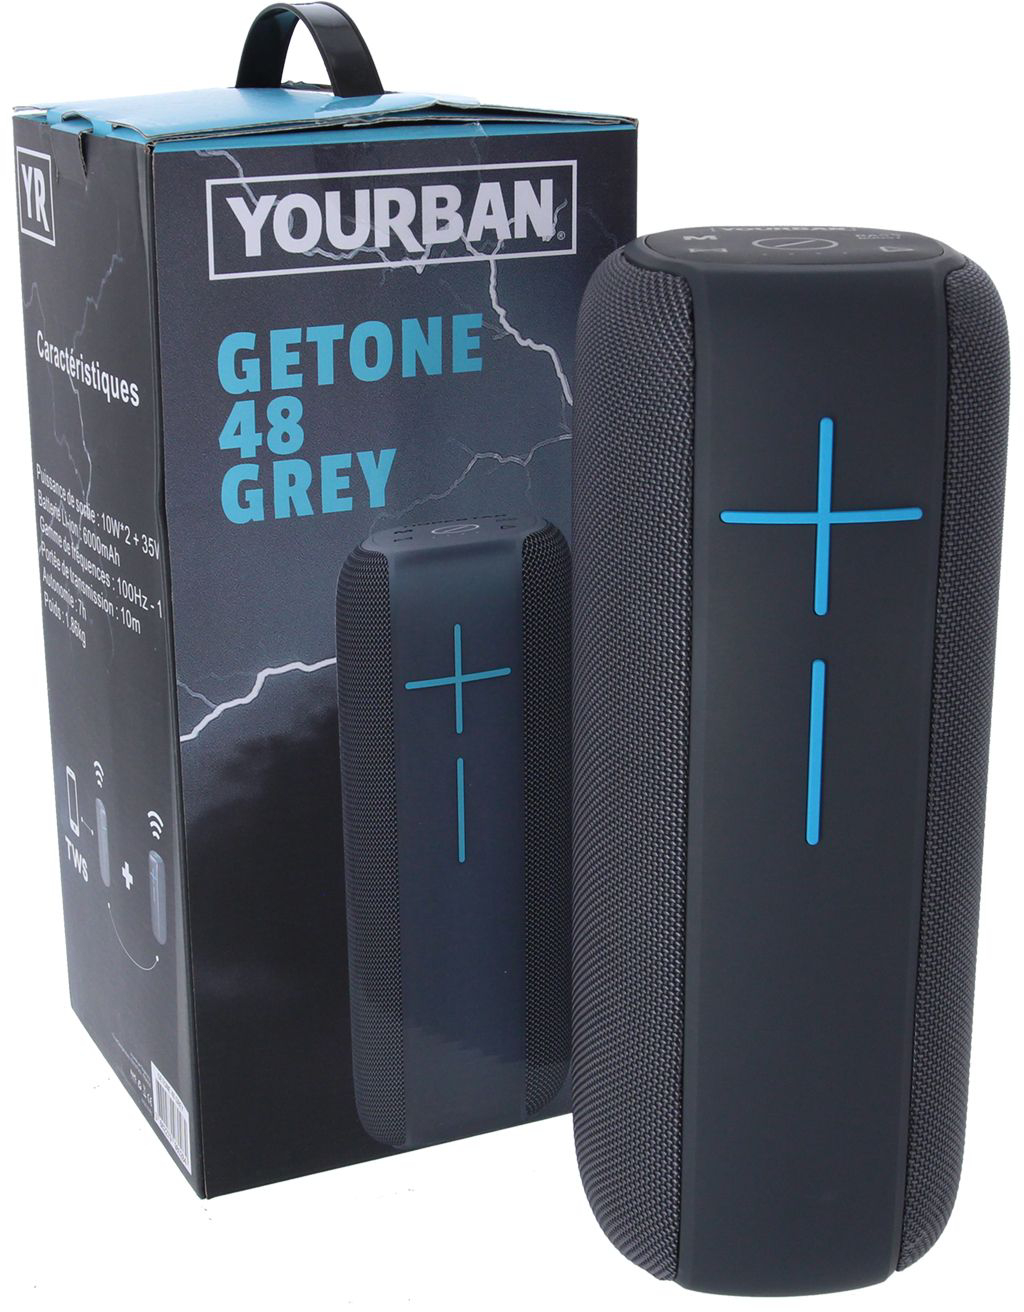 Yourban Getone 48 Grey - Mobile PA-Systeme - Variation 5